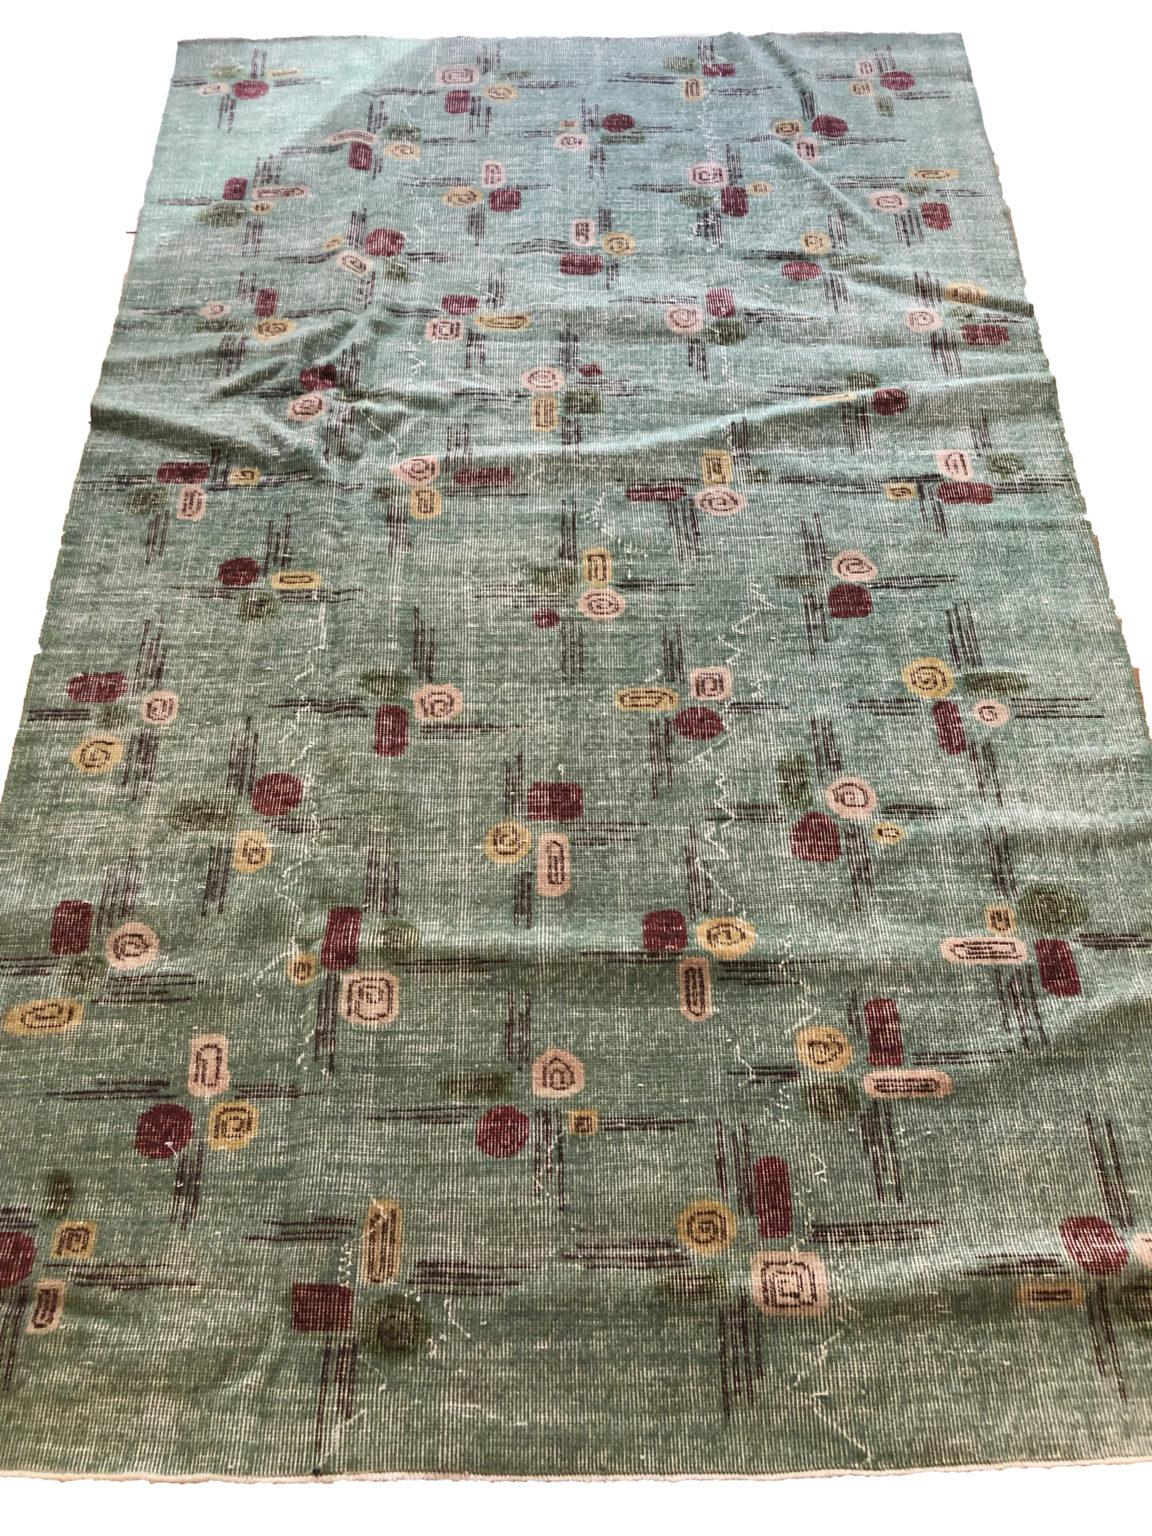 Vintage Turkish made, Scandinavian design, looks like abstracted rose buds. Charming and one of a kind. 100% wool.

7’9″ x 4’10”

16031